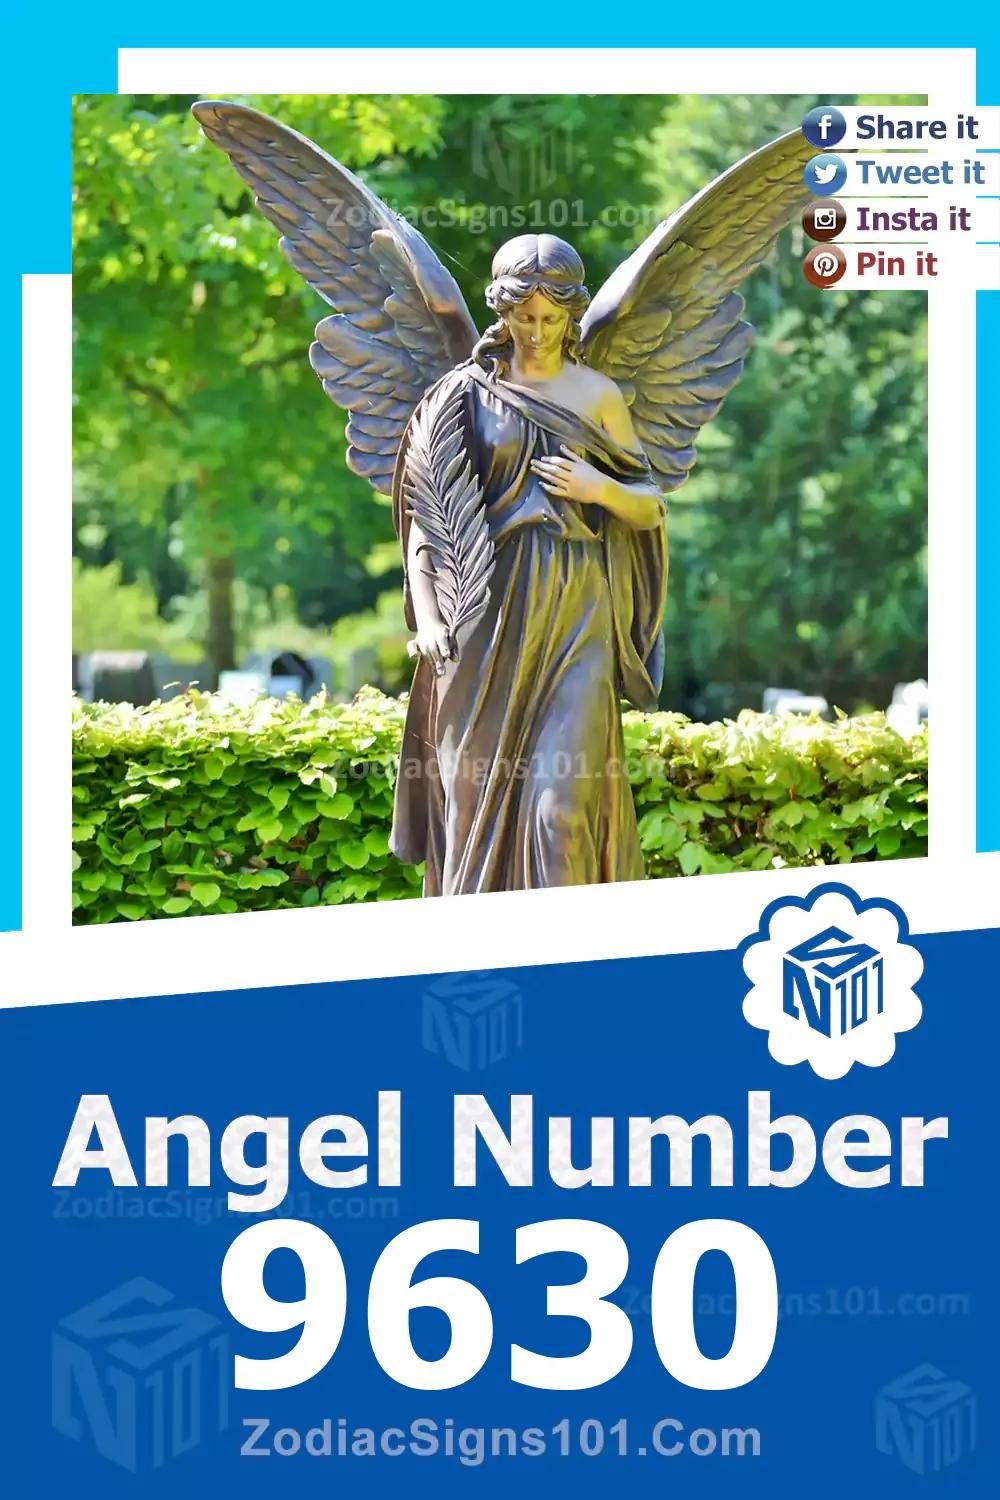 9630 Angel Number Meaning